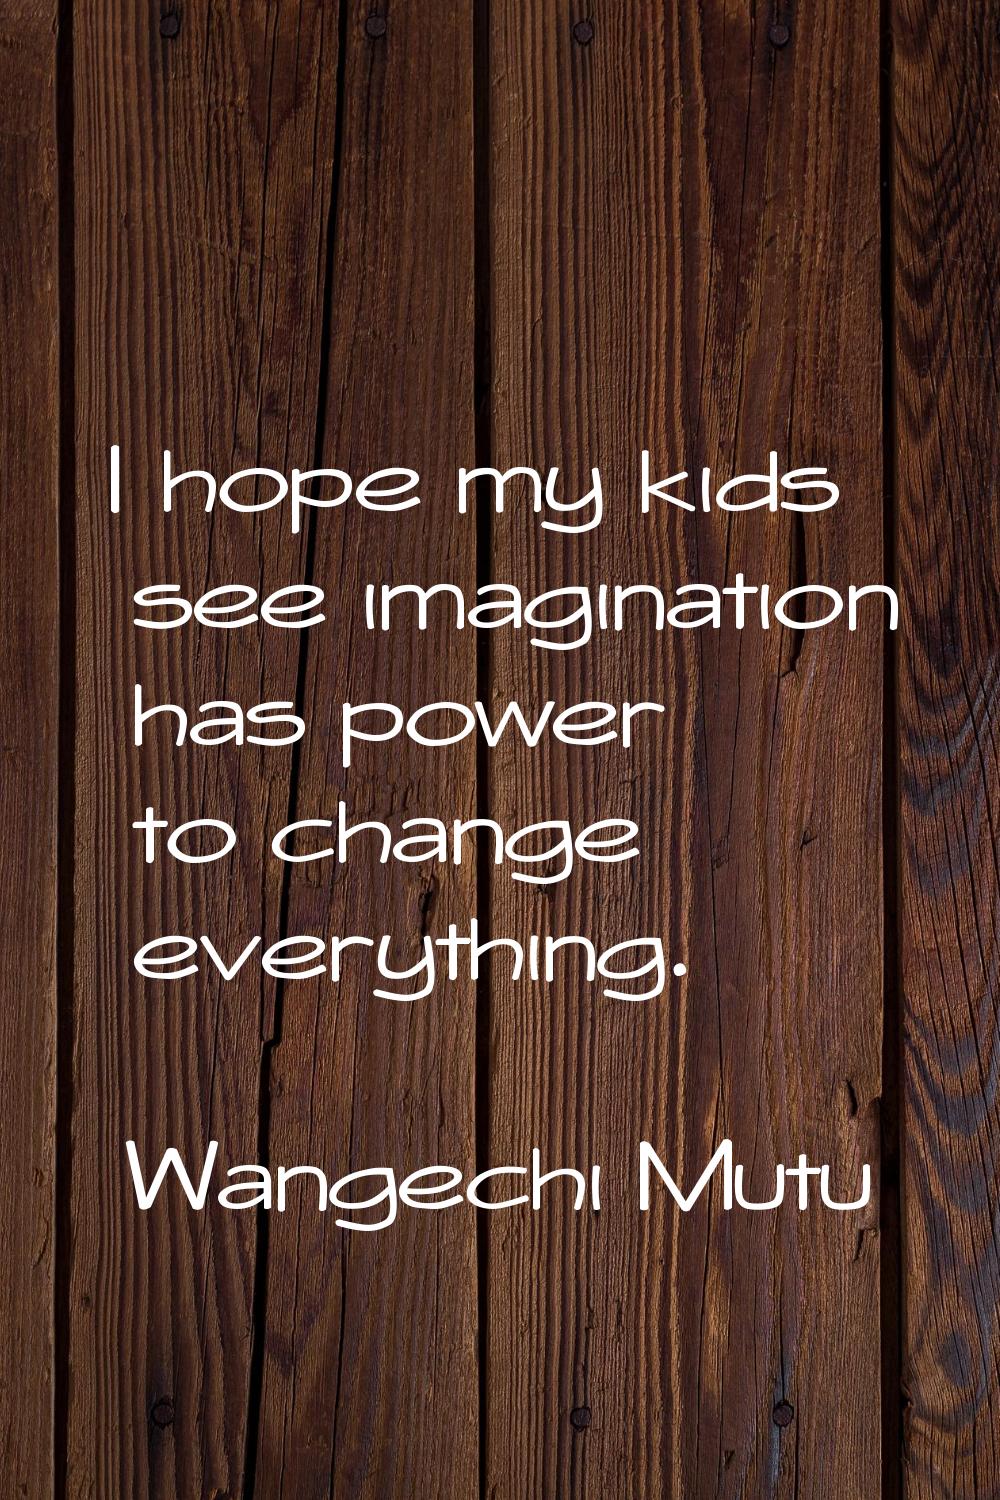 I hope my kids see imagination has power to change everything.